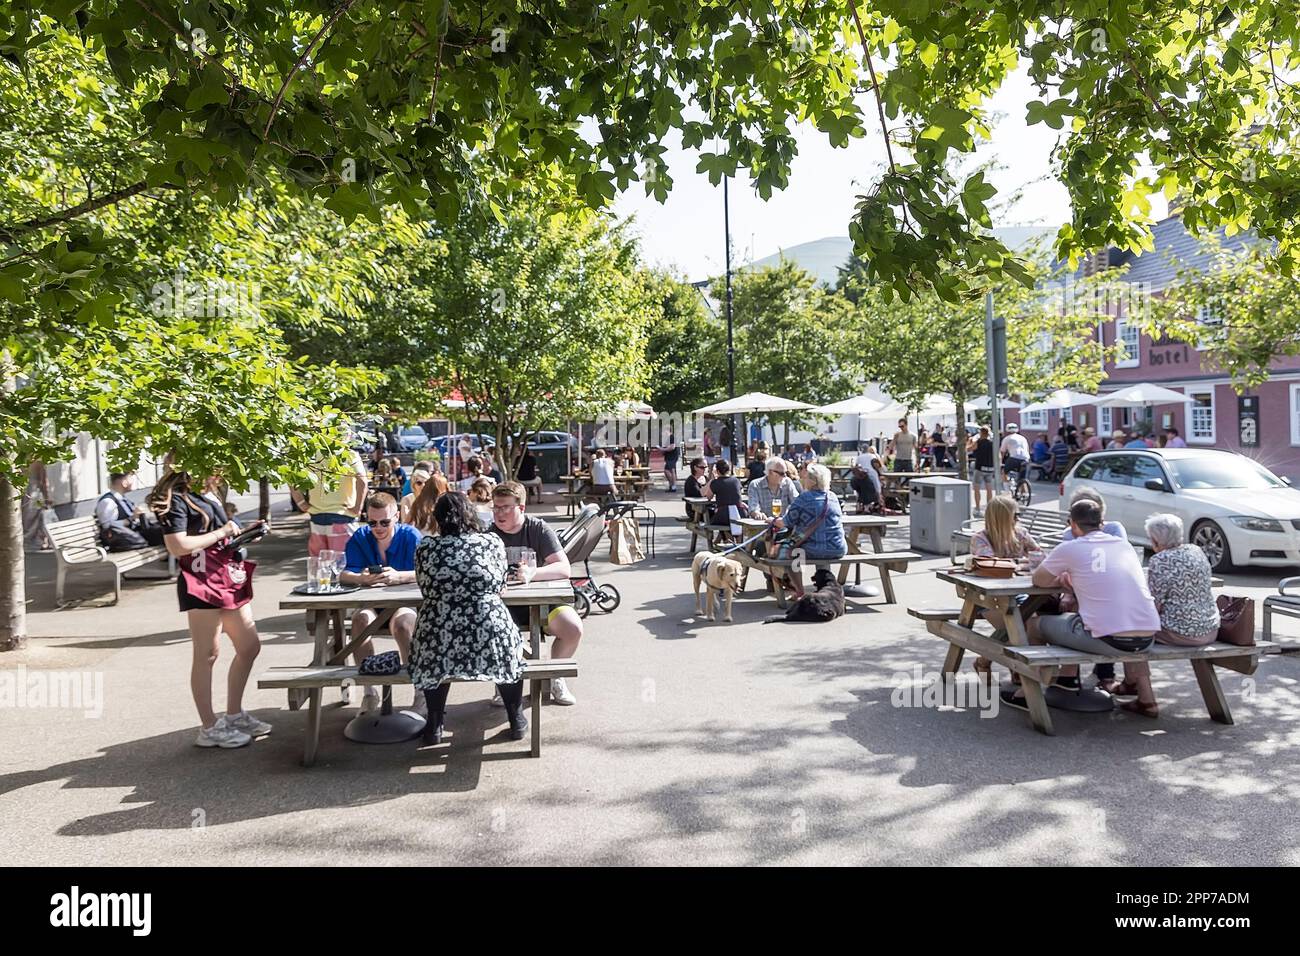 People at picnic tables waited on by public house serving food outdoors, Abergavenny, Wales, UK Stock Photo